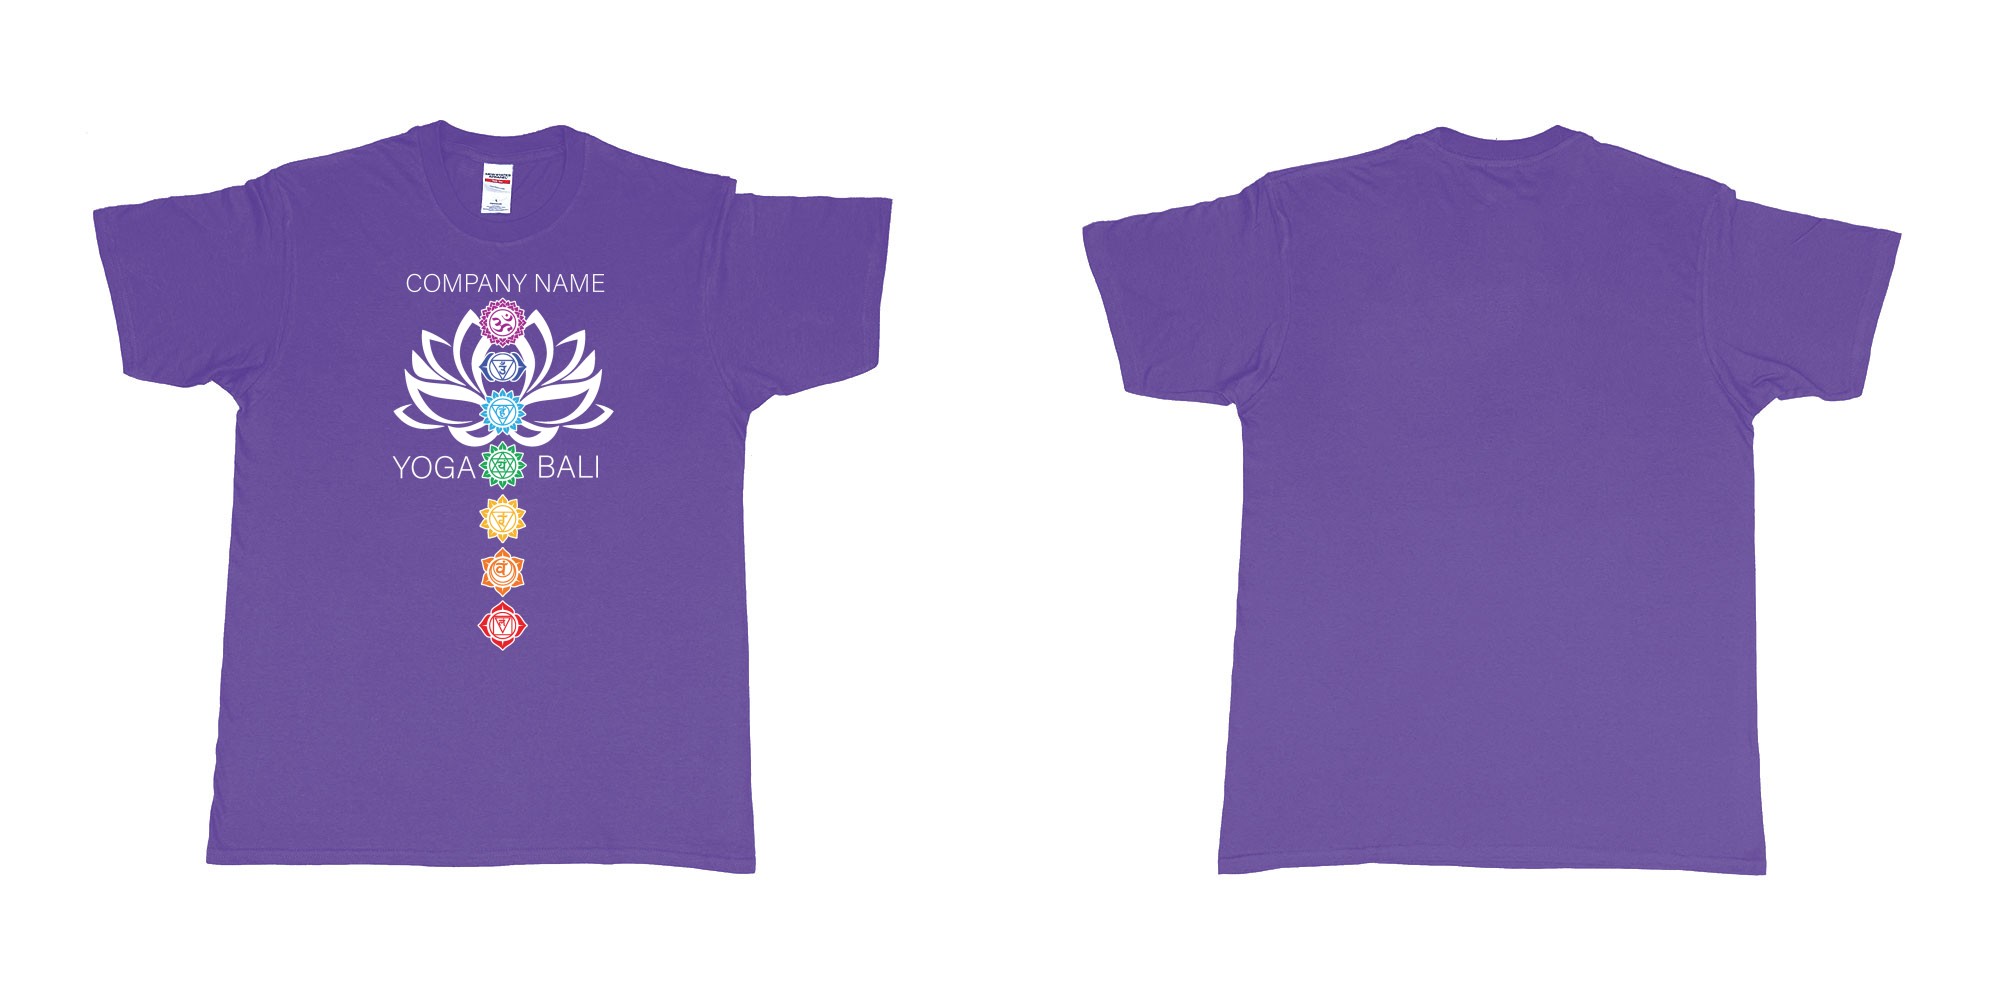 Custom tshirt design lotus flower chakras yoga hindi symbols for custom teeshirt printing in fabric color purple choice your own text made in Bali by The Pirate Way